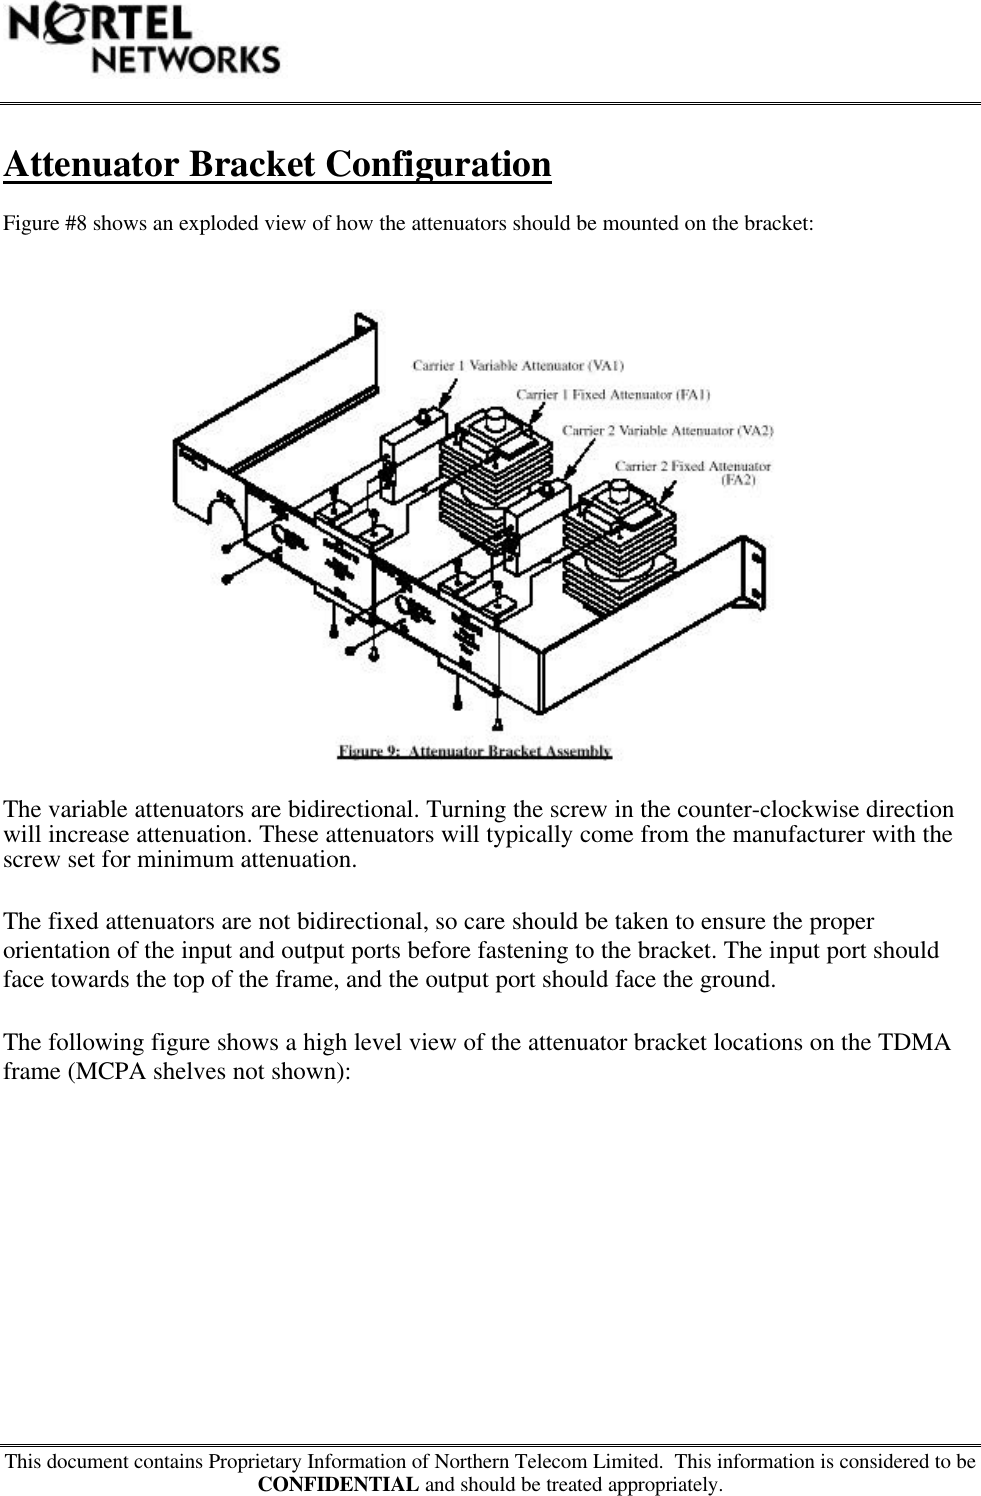 This document contains Proprietary Information of Northern Telecom Limited.  This information is considered to beCONFIDENTIAL and should be treated appropriately.Attenuator Bracket ConfigurationFigure #8 shows an exploded view of how the attenuators should be mounted on the bracket:The variable attenuators are bidirectional. Turning the screw in the counter-clockwise directionwill increase attenuation. These attenuators will typically come from the manufacturer with thescrew set for minimum attenuation.The fixed attenuators are not bidirectional, so care should be taken to ensure the properorientation of the input and output ports before fastening to the bracket. The input port shouldface towards the top of the frame, and the output port should face the ground.The following figure shows a high level view of the attenuator bracket locations on the TDMAframe (MCPA shelves not shown):